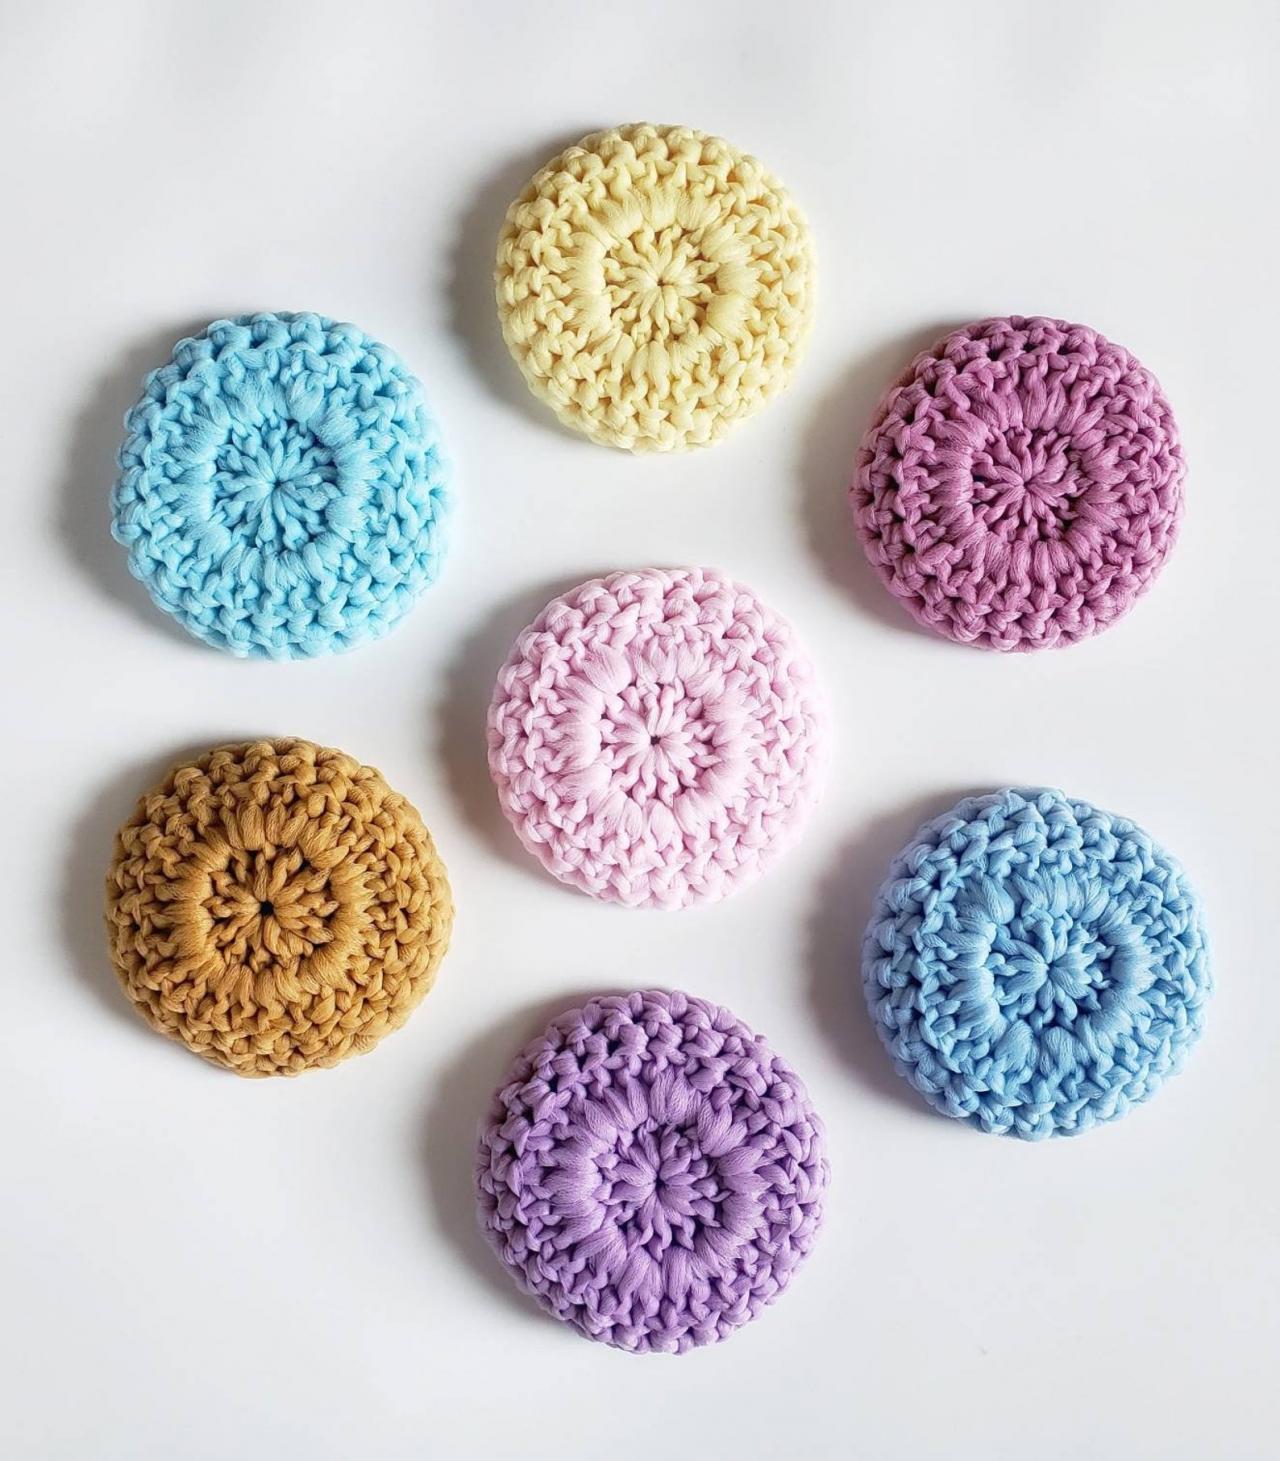 Solstice Dish Scrubby - Tulle Scrubby - Crochet Dish Scrubbies - Crochet Tulle Scrubby - Colorful Scrubby - Solstice Scrubby (choose 3)